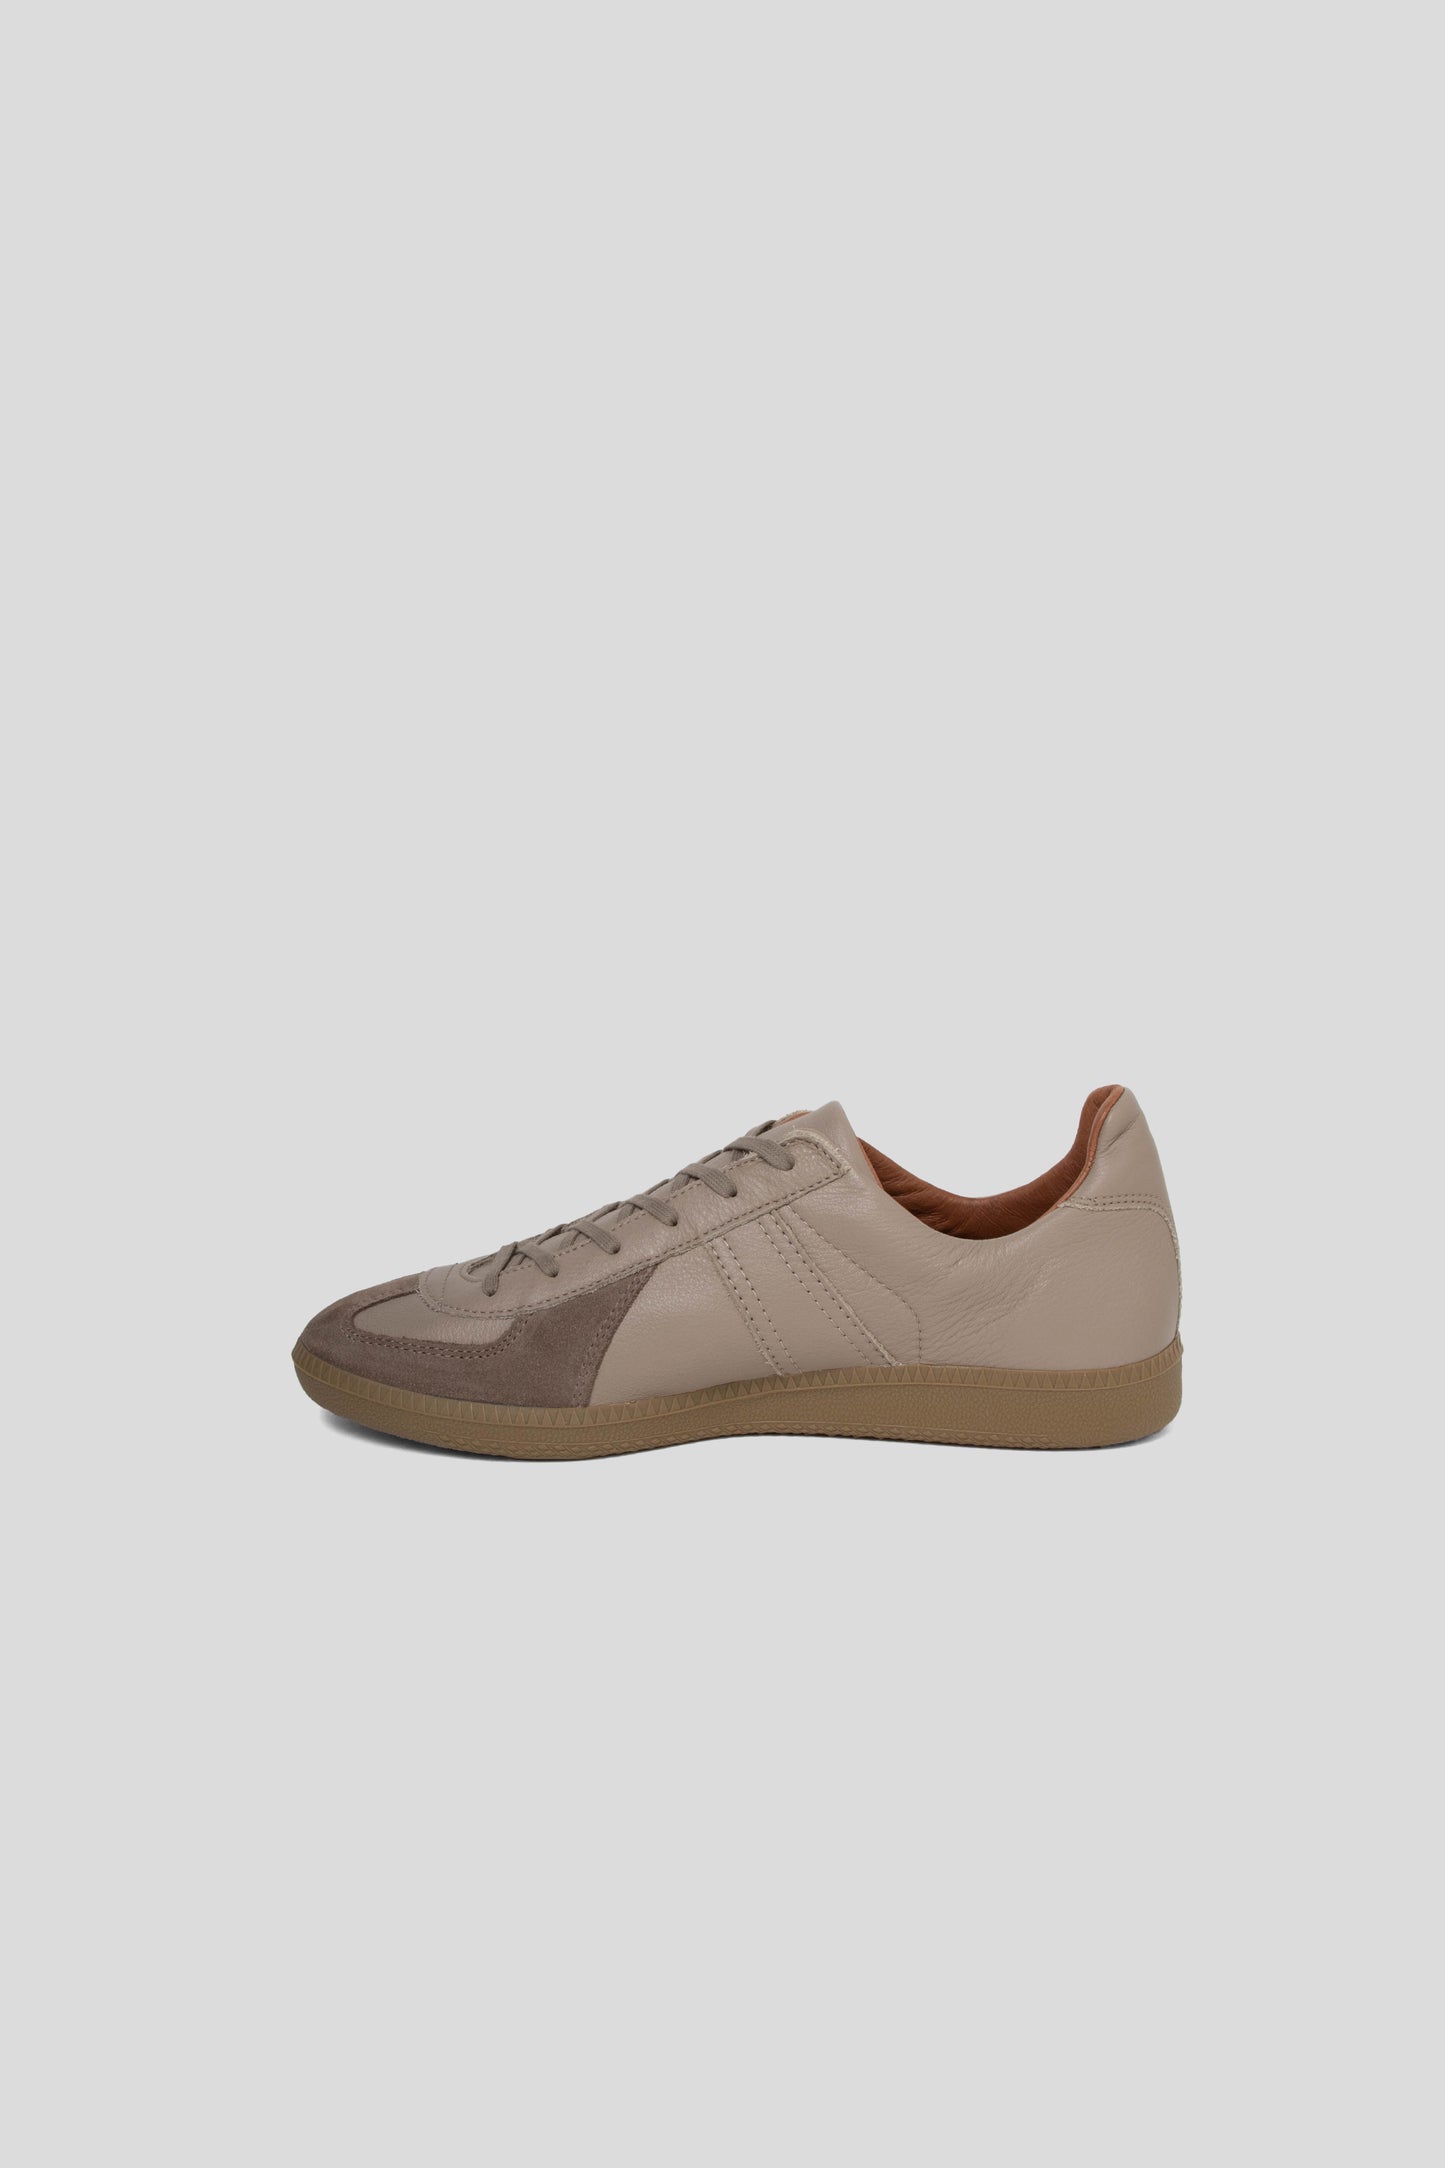 Reproduction of Found Women's German Military Trainer - Beige Khaki